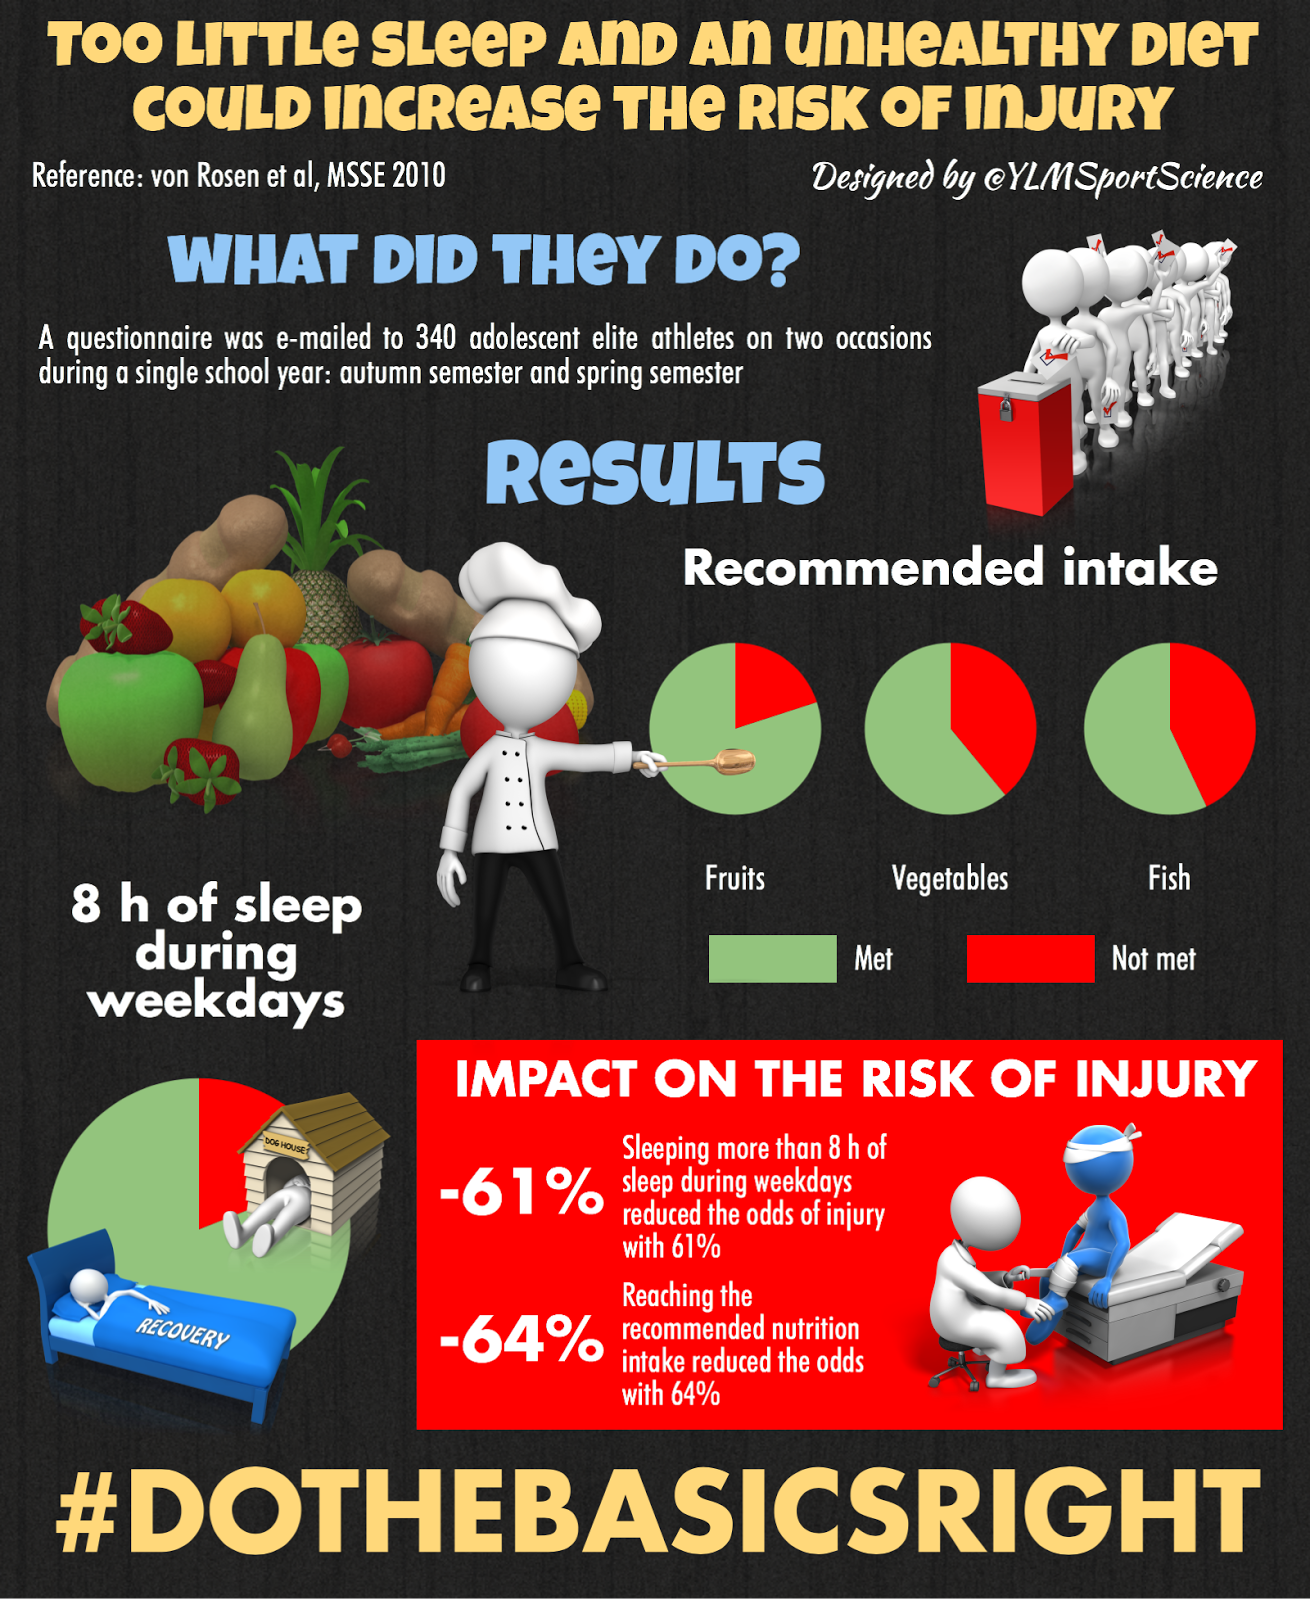 Injury prevention through adequate nutrition